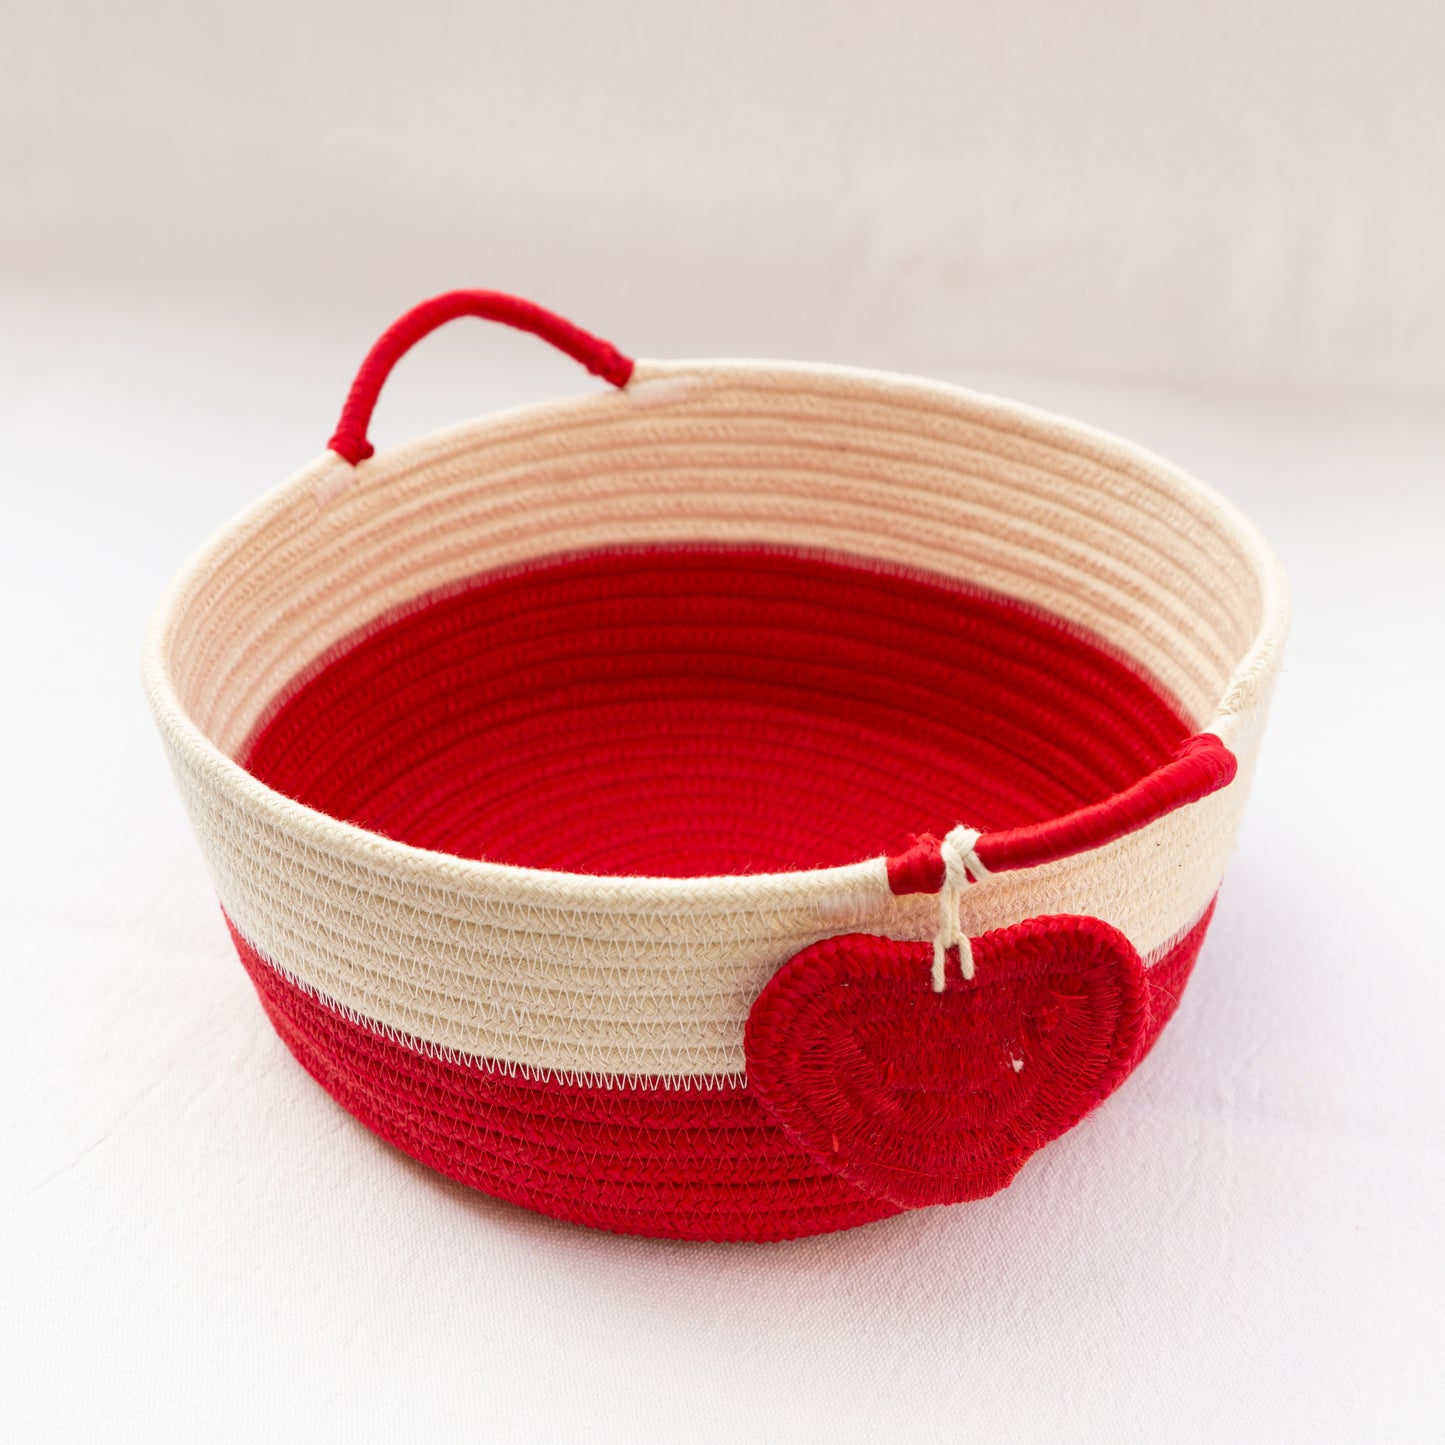 Red and white cotton basket